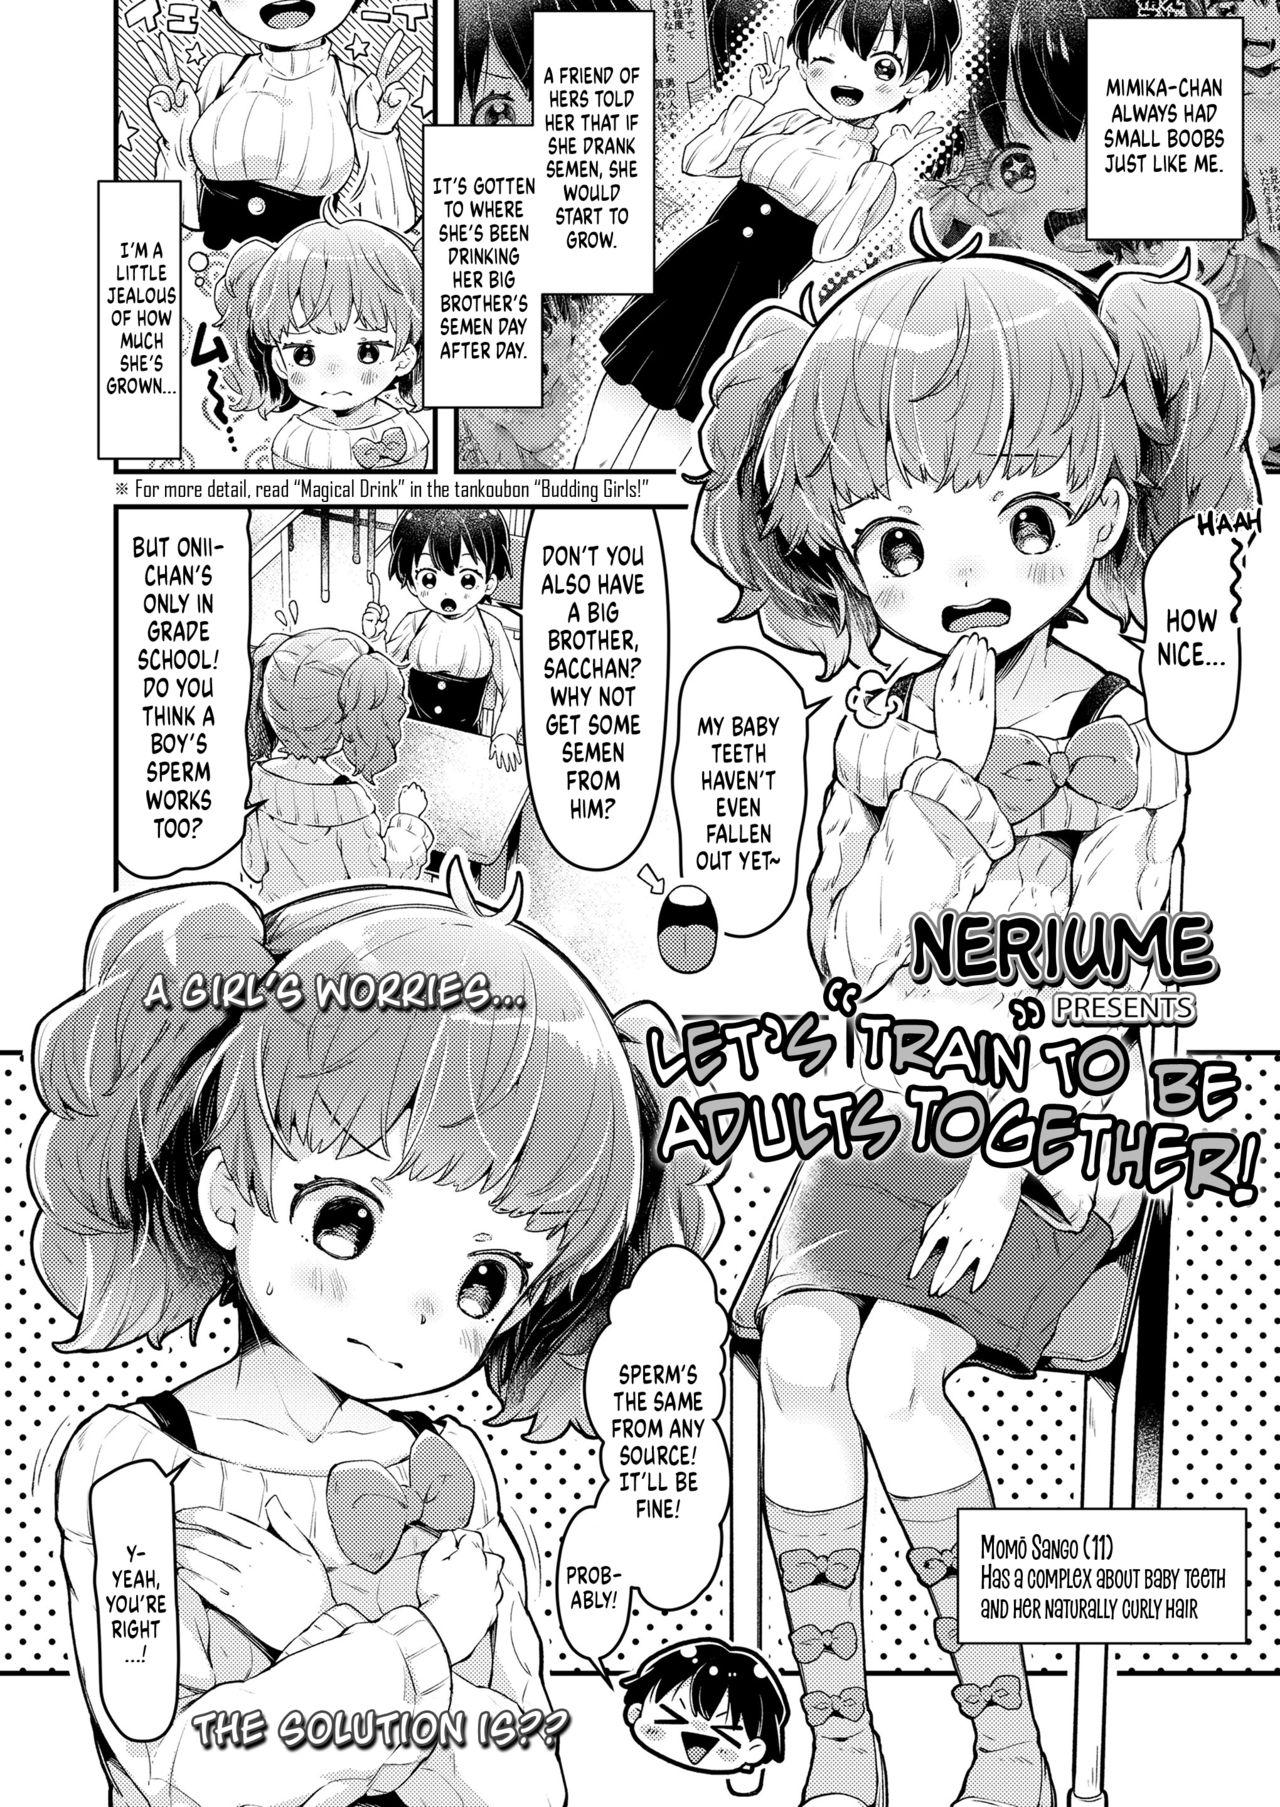 Stockings Issho ni Otona Training! | Let's Train to be Adults Together! Strange - Page 2